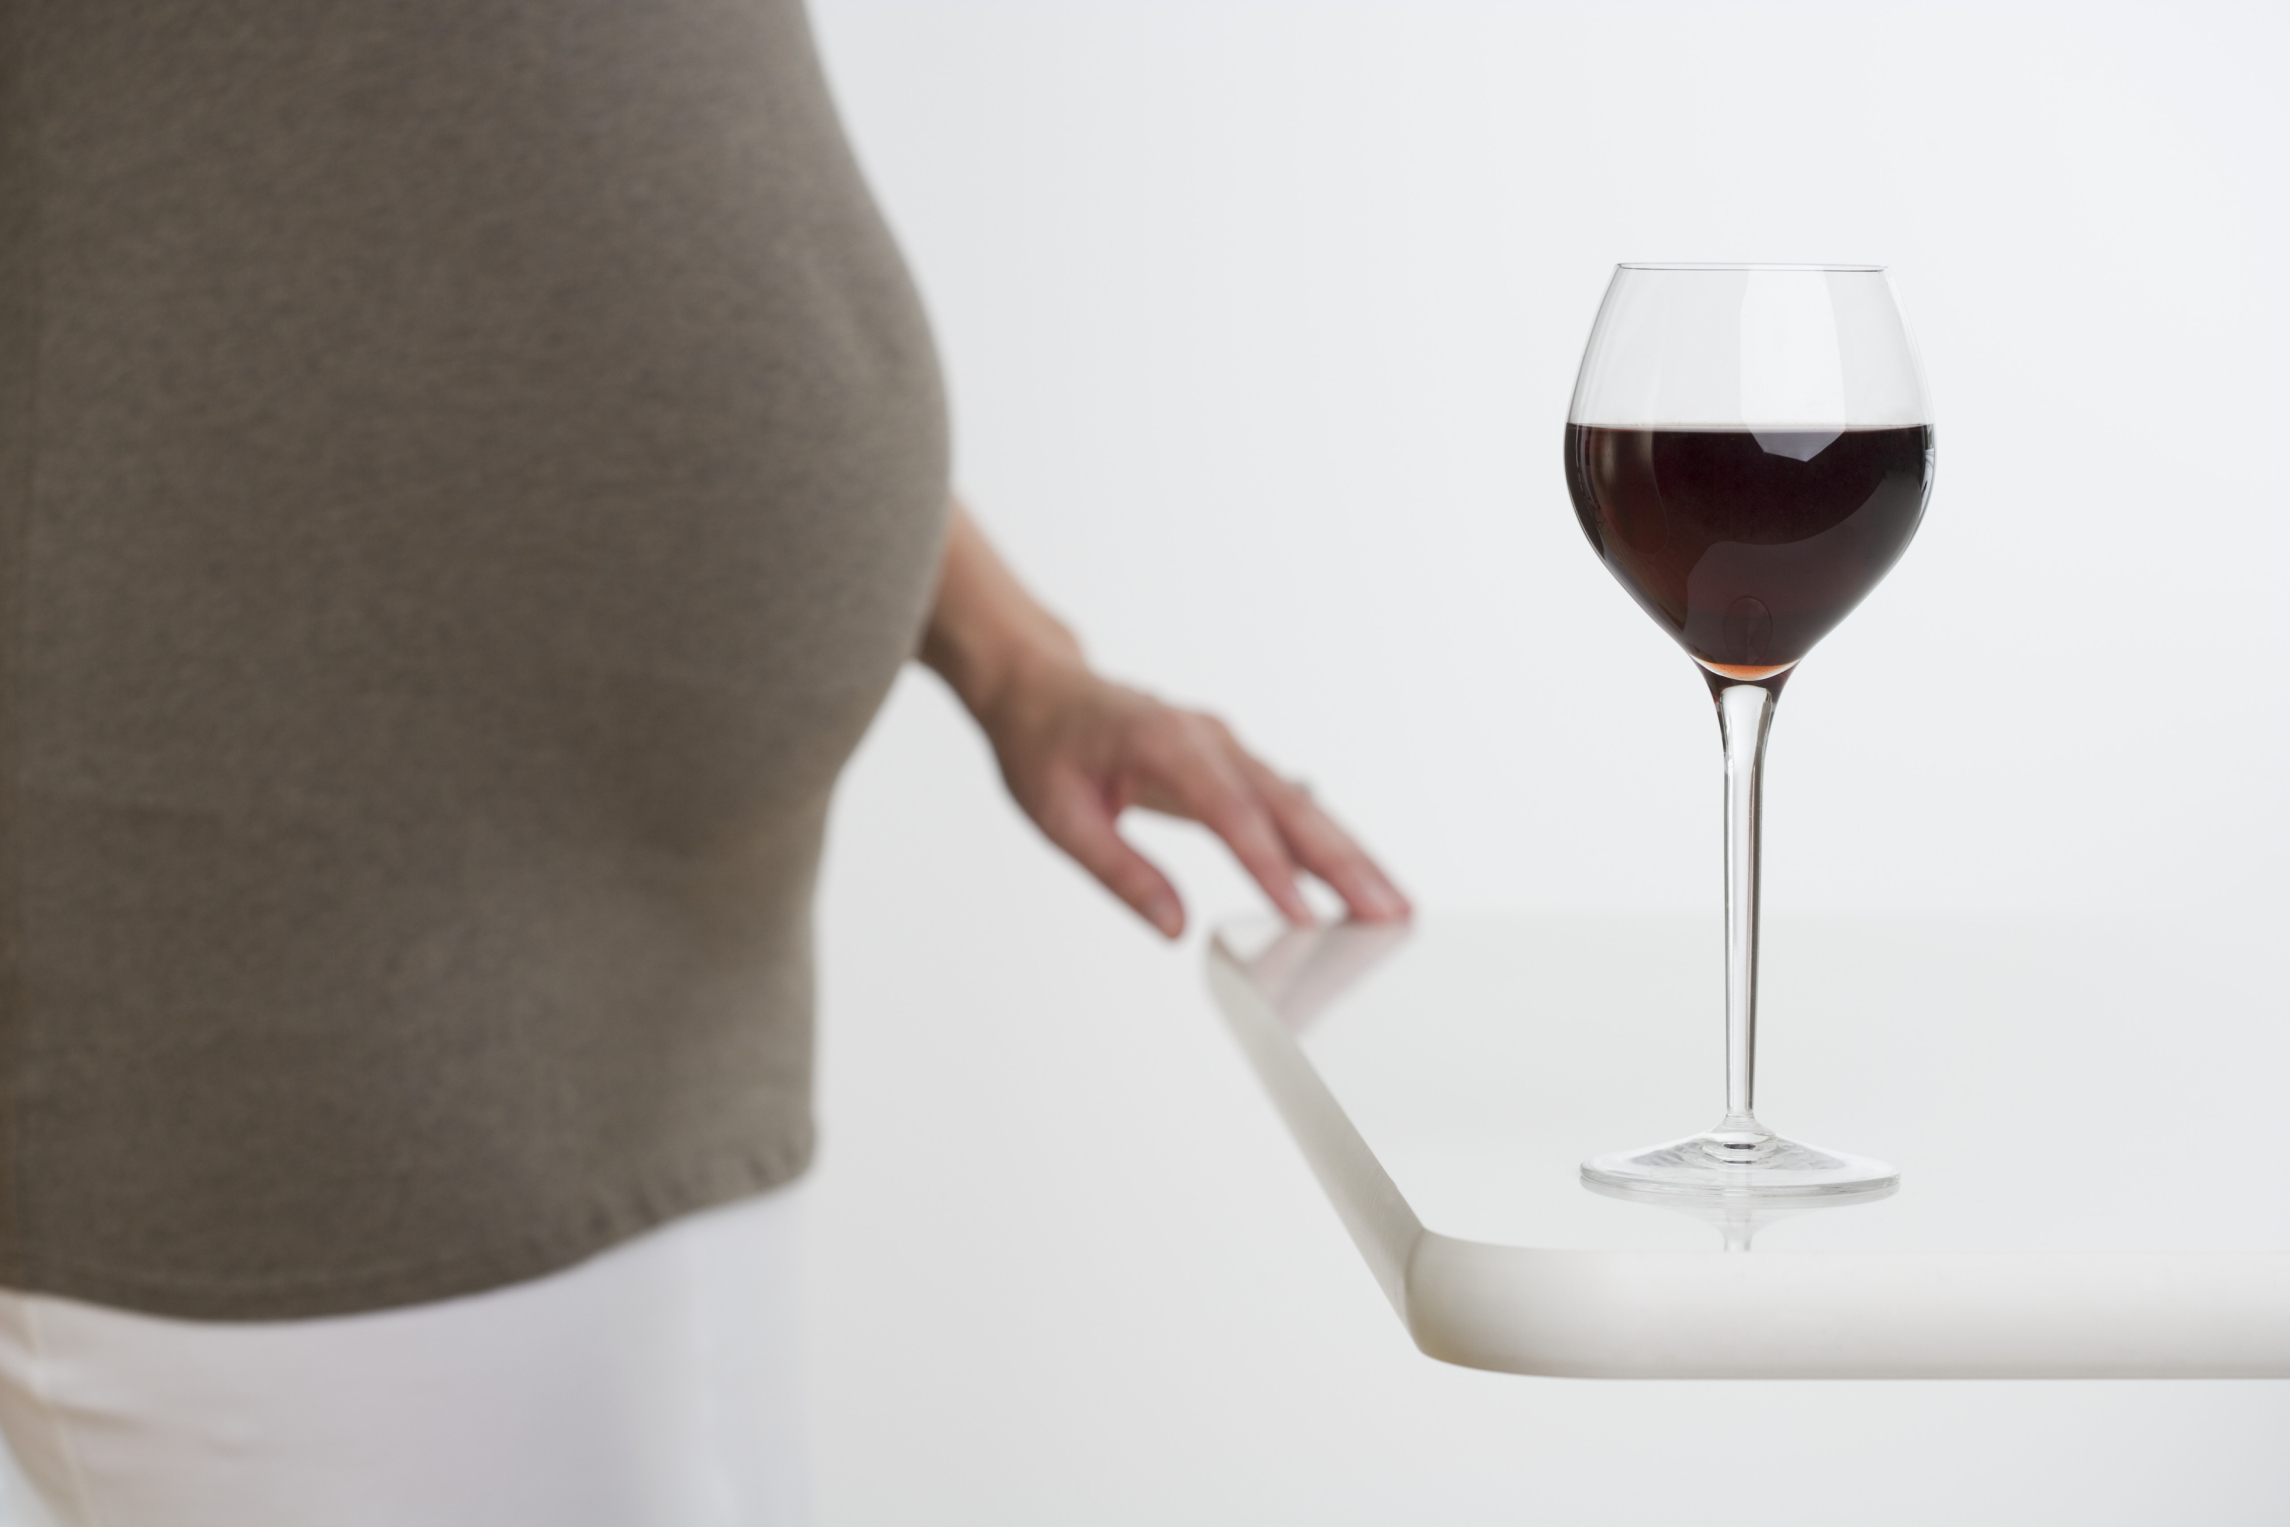 CDC: 1 in 10 pregnant women report alcohol use